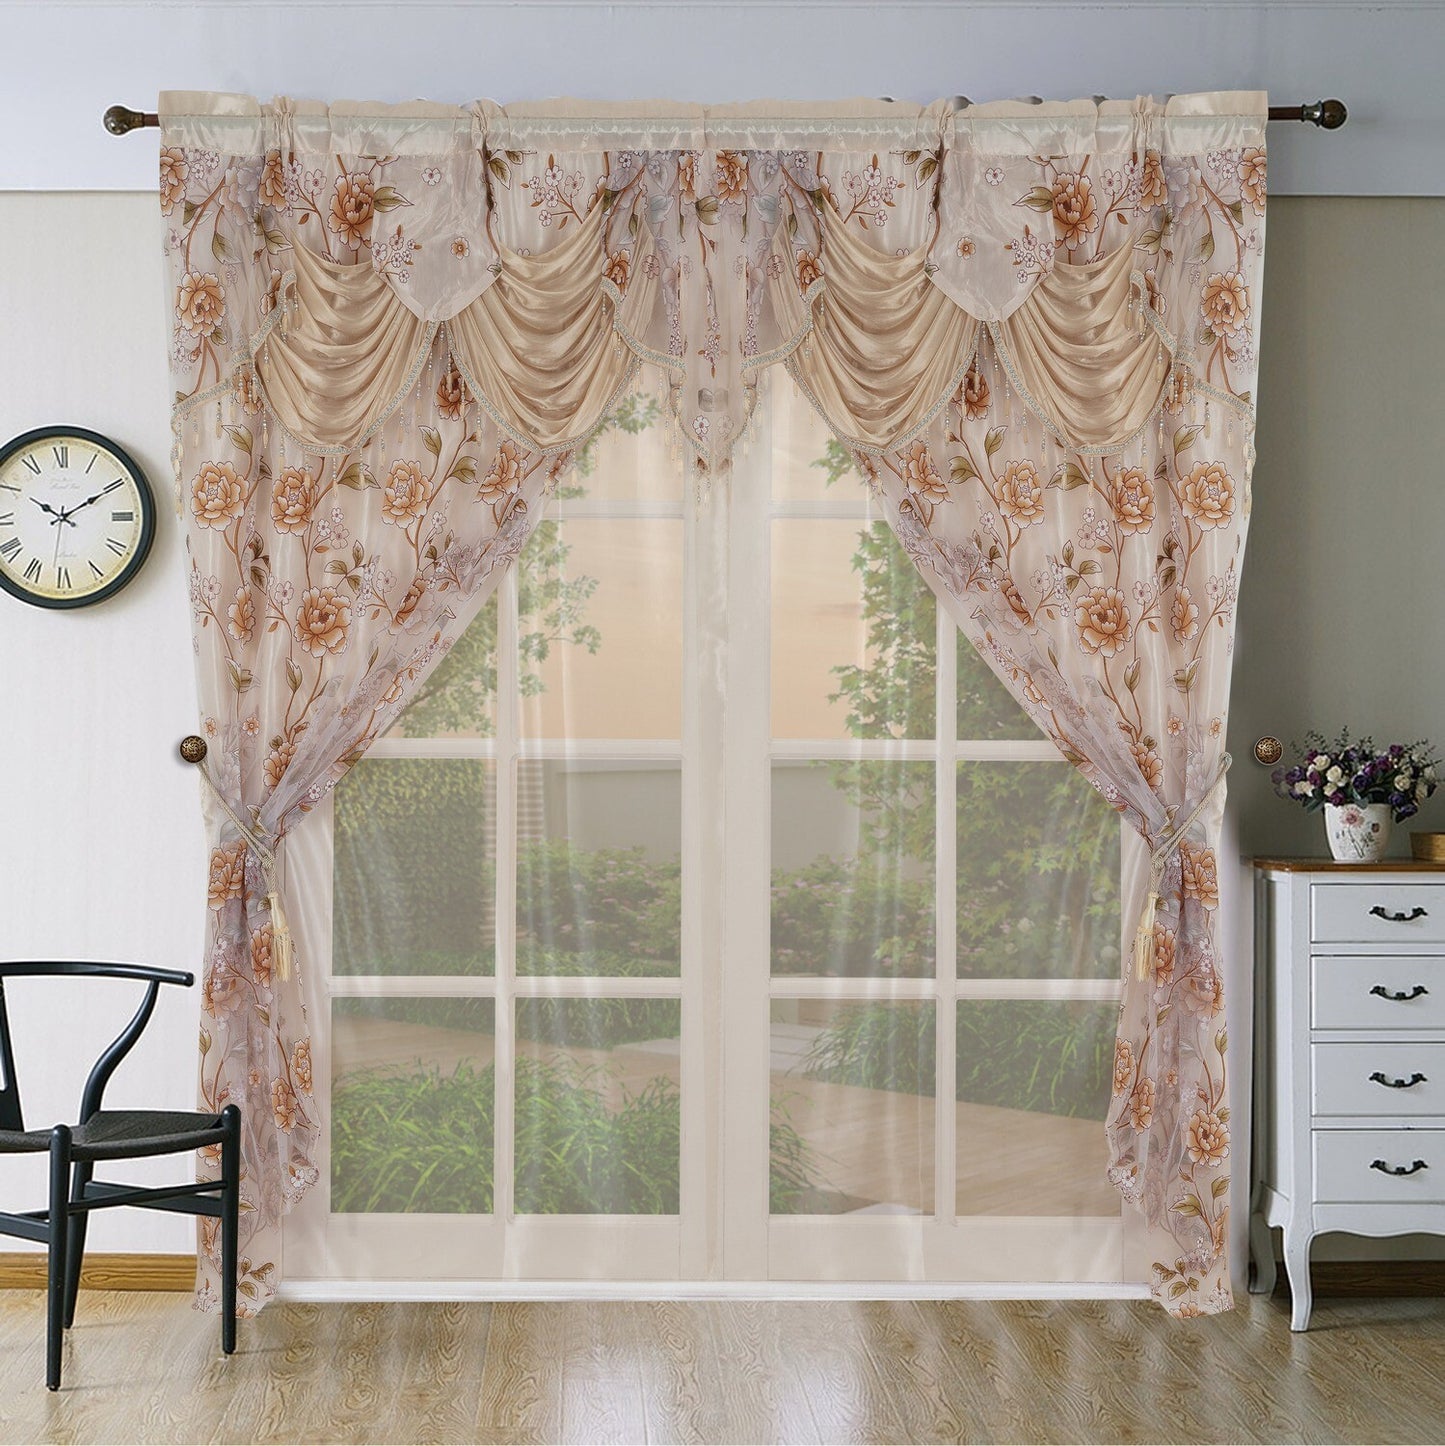 Glory Rugs Flower Curtain Window Panel Set 2 Luxury Curtains with Attached Valance and Sheer Backing Living Room Bedroom Dining 55x84 Each Balsam Beige